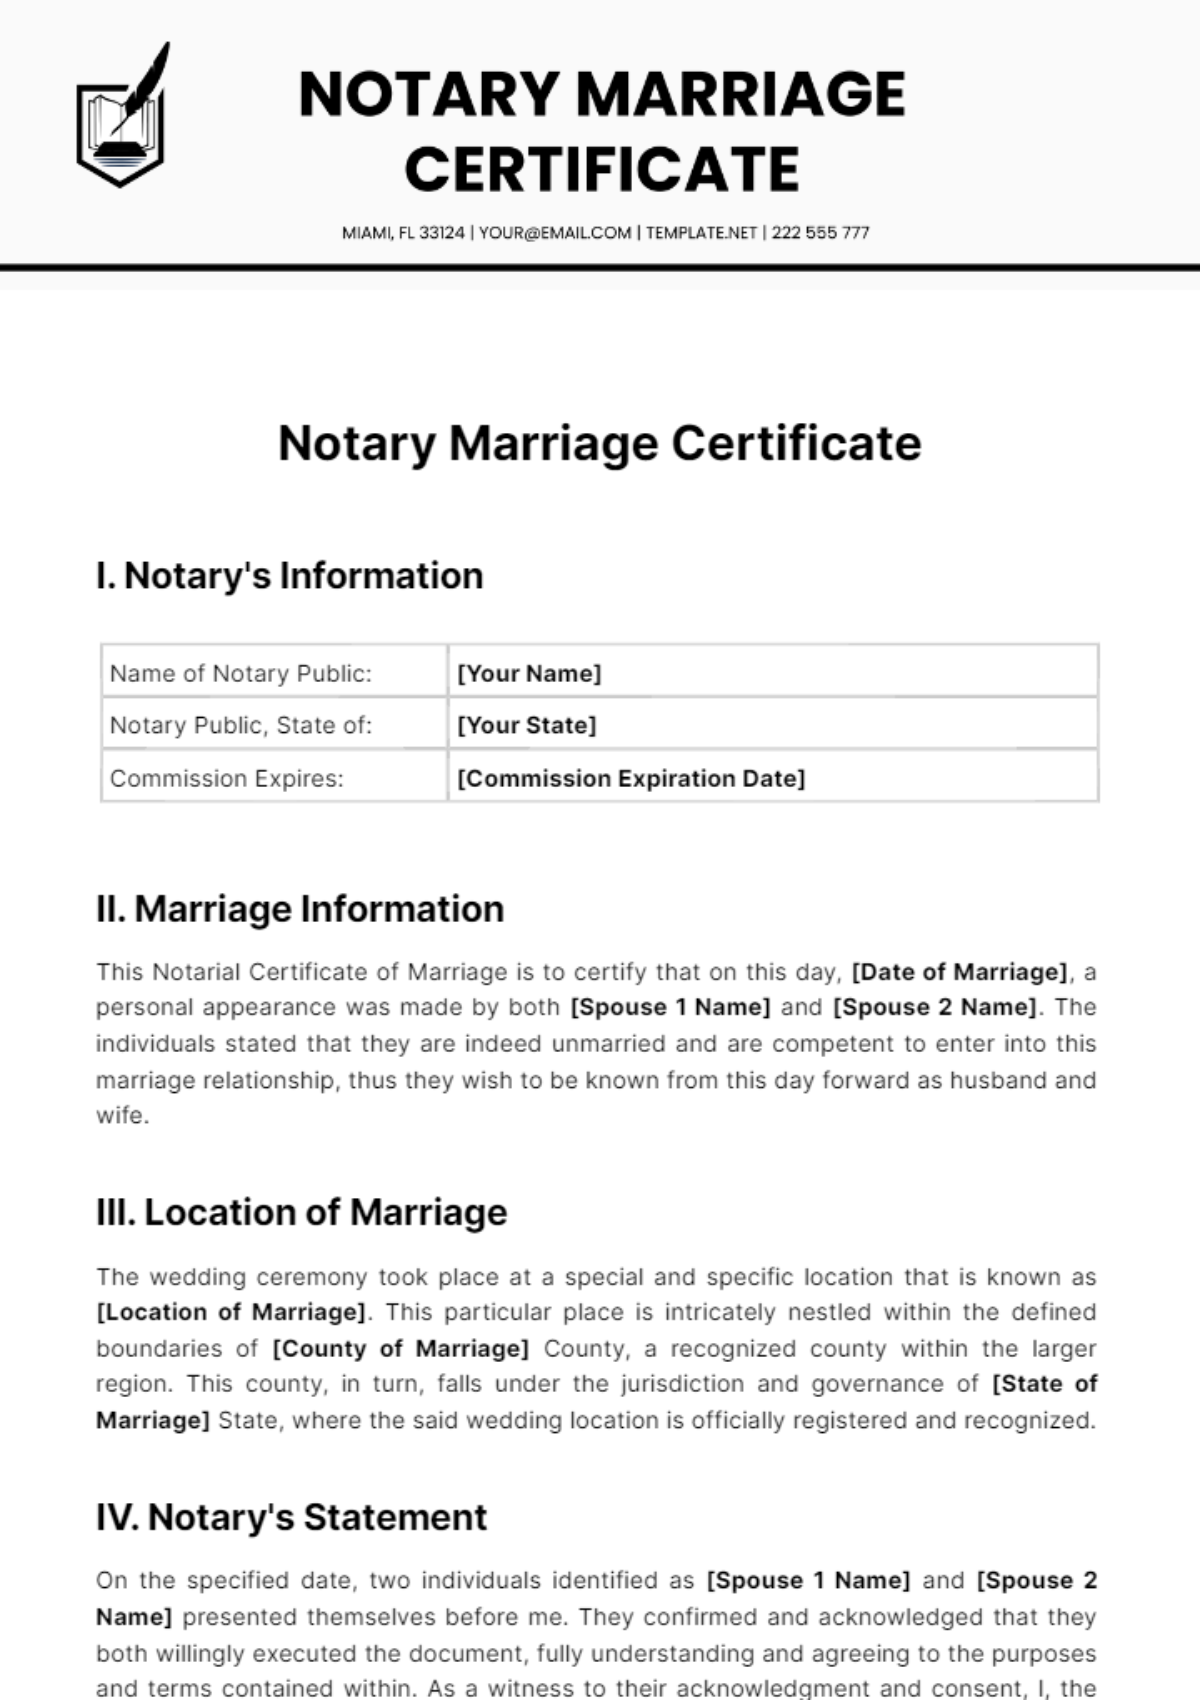 Notary Marriage Certificate Template